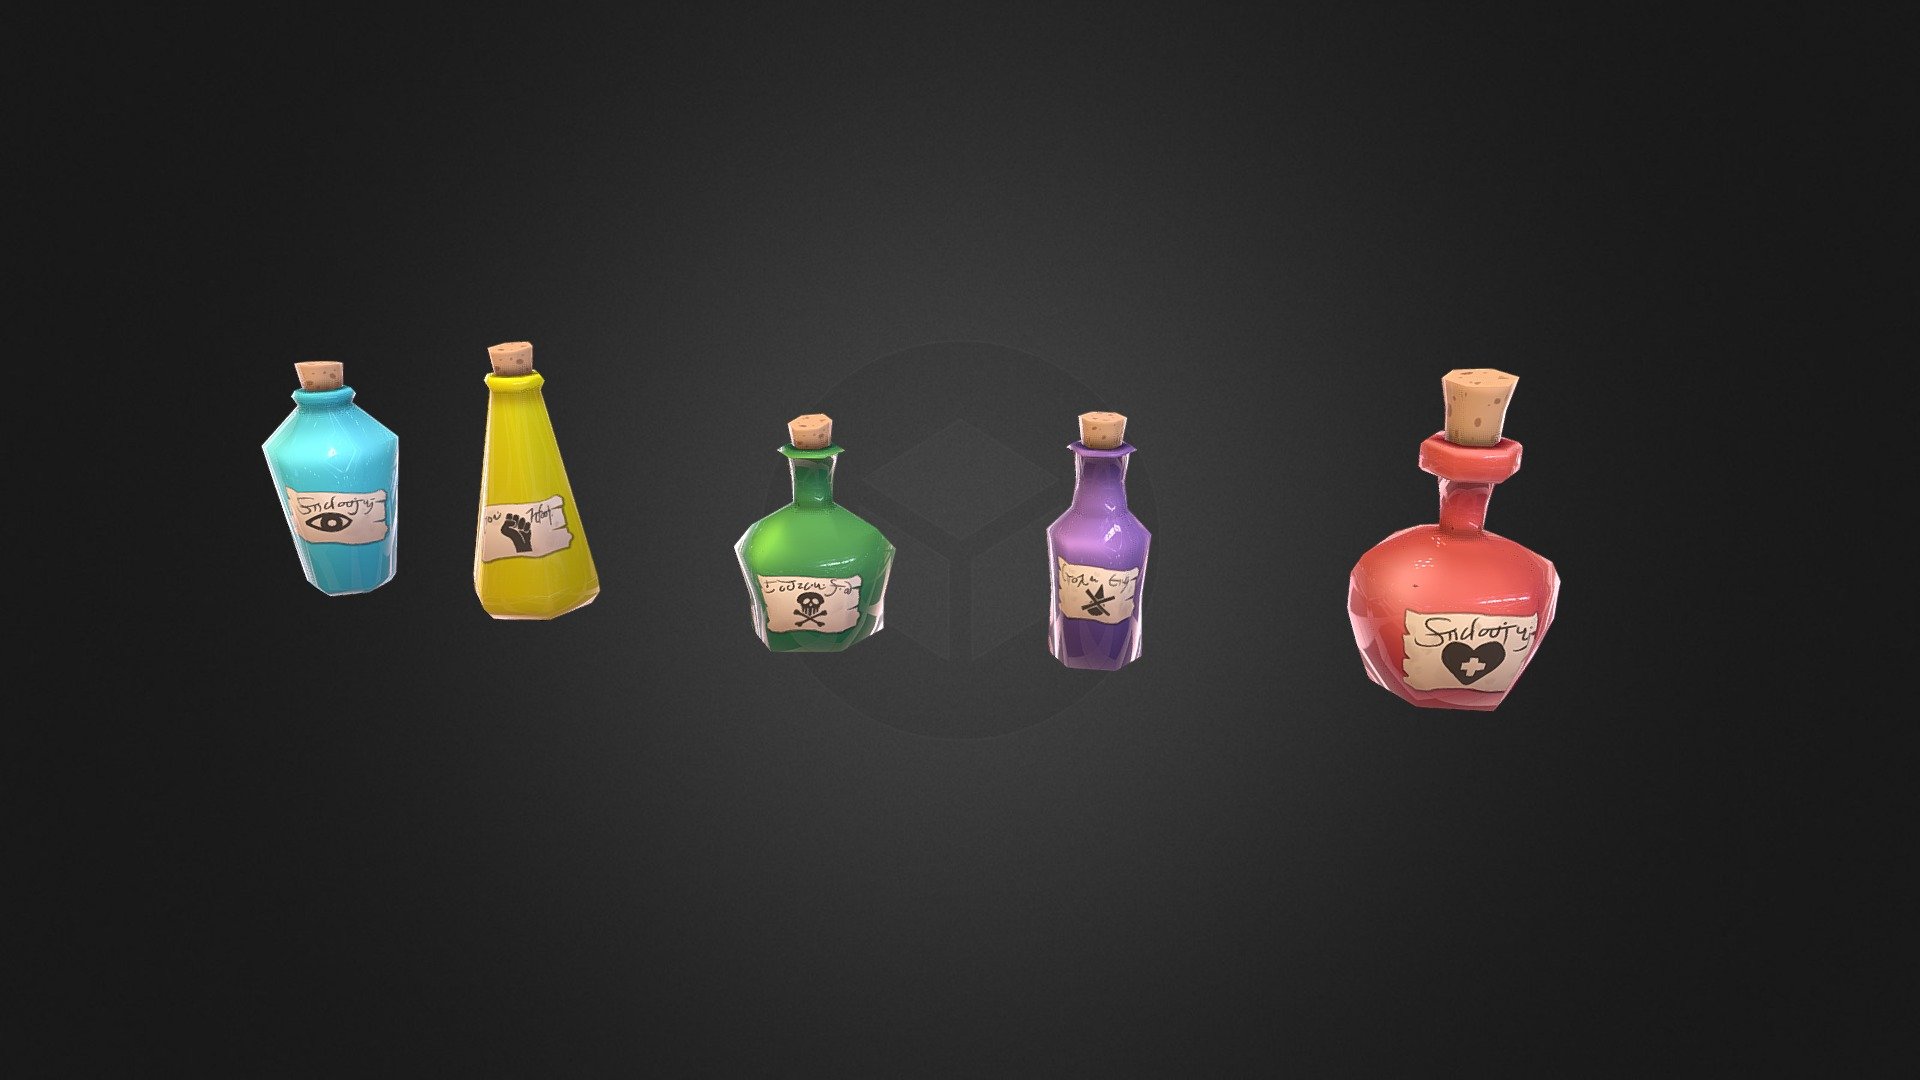 Who wants only one variety of potion when you have five to choose from?!

Blue Potion of Invisability
Yellow Potion of Strength
Green Potion of Poison
Purple Potion of Antidote
Red Potion of Health - Witch's Potions! - 3D model by Graham (@graham3d) 3d model